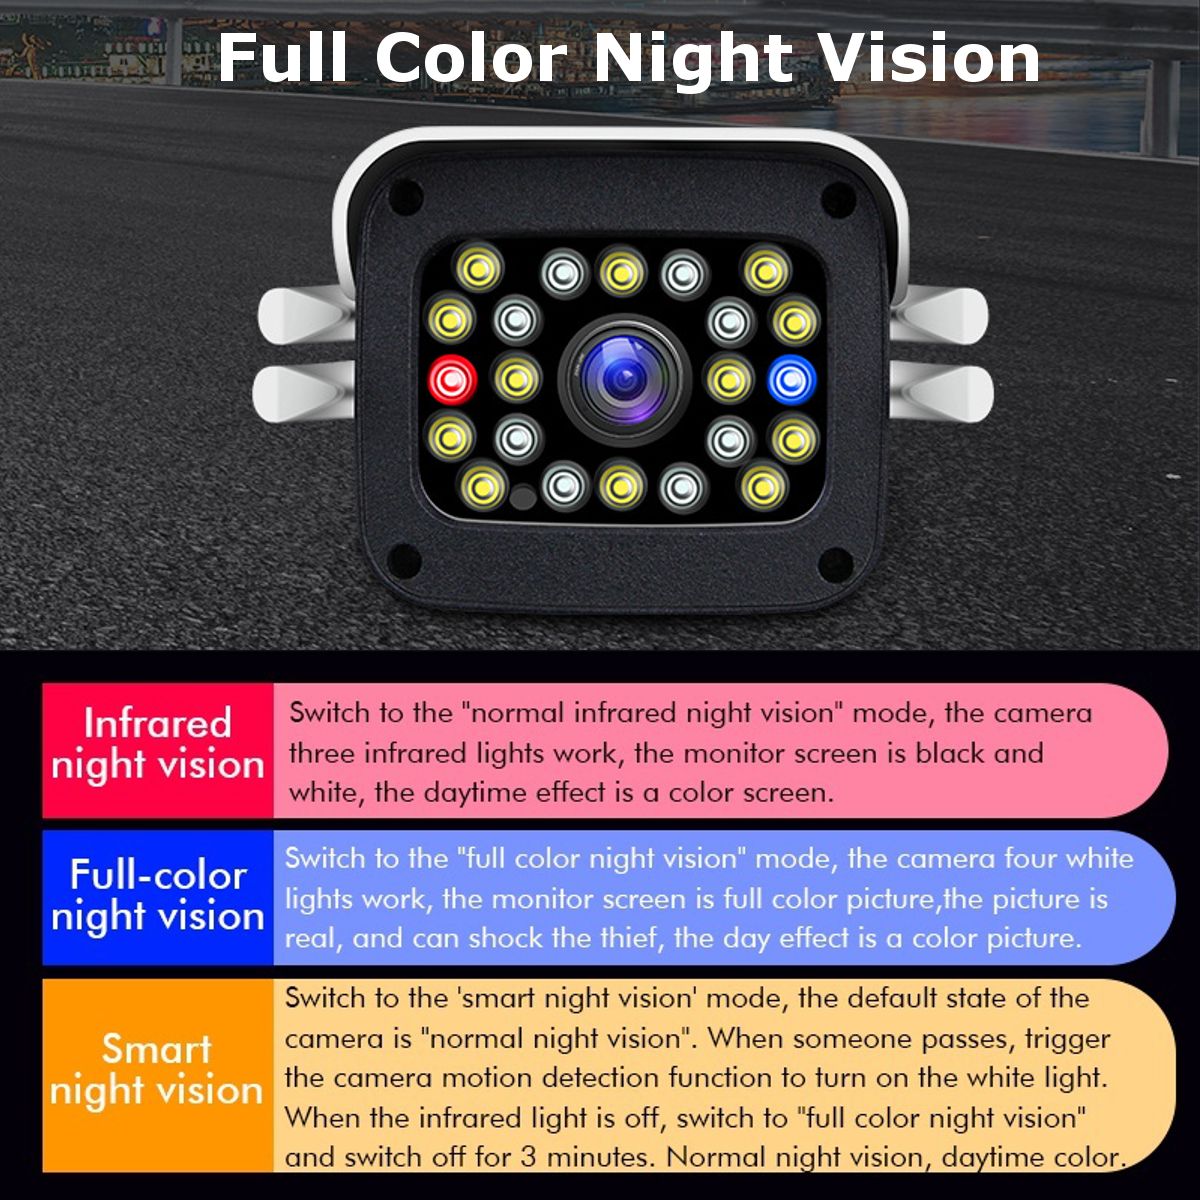 22-LED-12V-High-Speed-WiFi-HD-1080P-Action-Detection-Surveillance-Night-Vision-Camera-H265-Two-Way-A-1706011